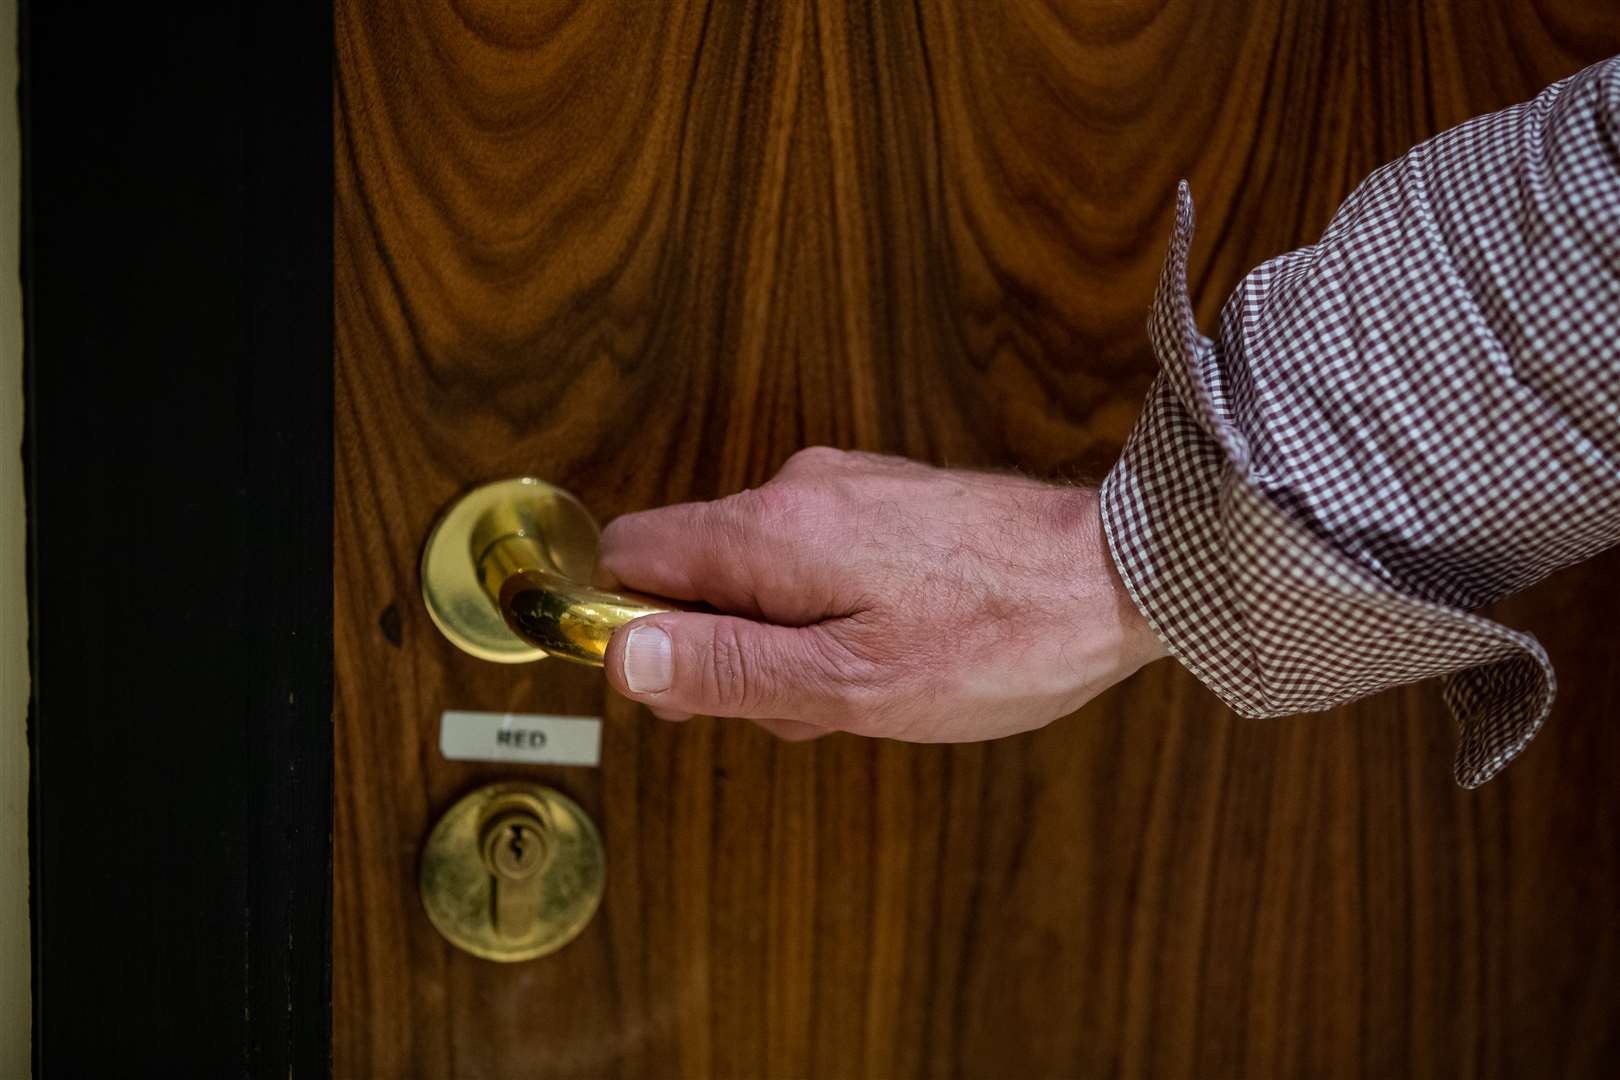 Door handles that kill off germs could be one design solution (Aaron Chown/PA)